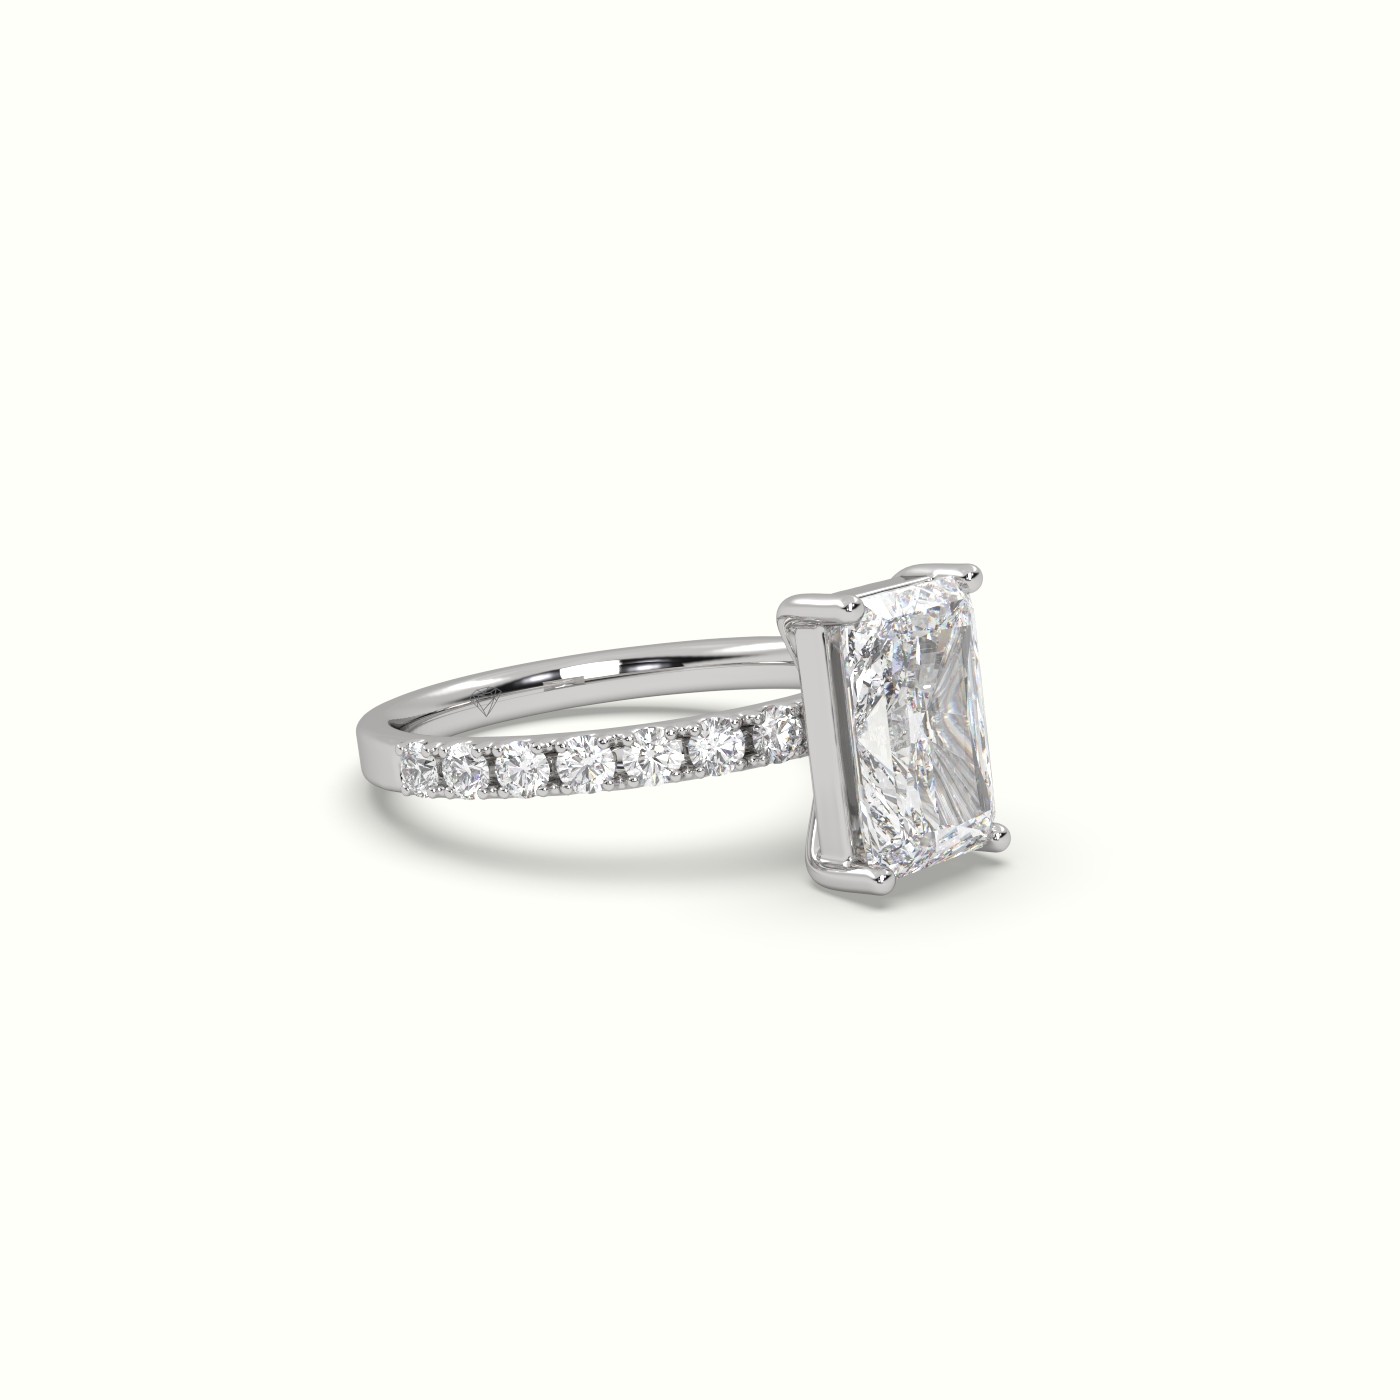 18K White Gold Radiant Diamond 4 prongs Ring with Pave Accents | Precious Jewels Antwerp Elegance